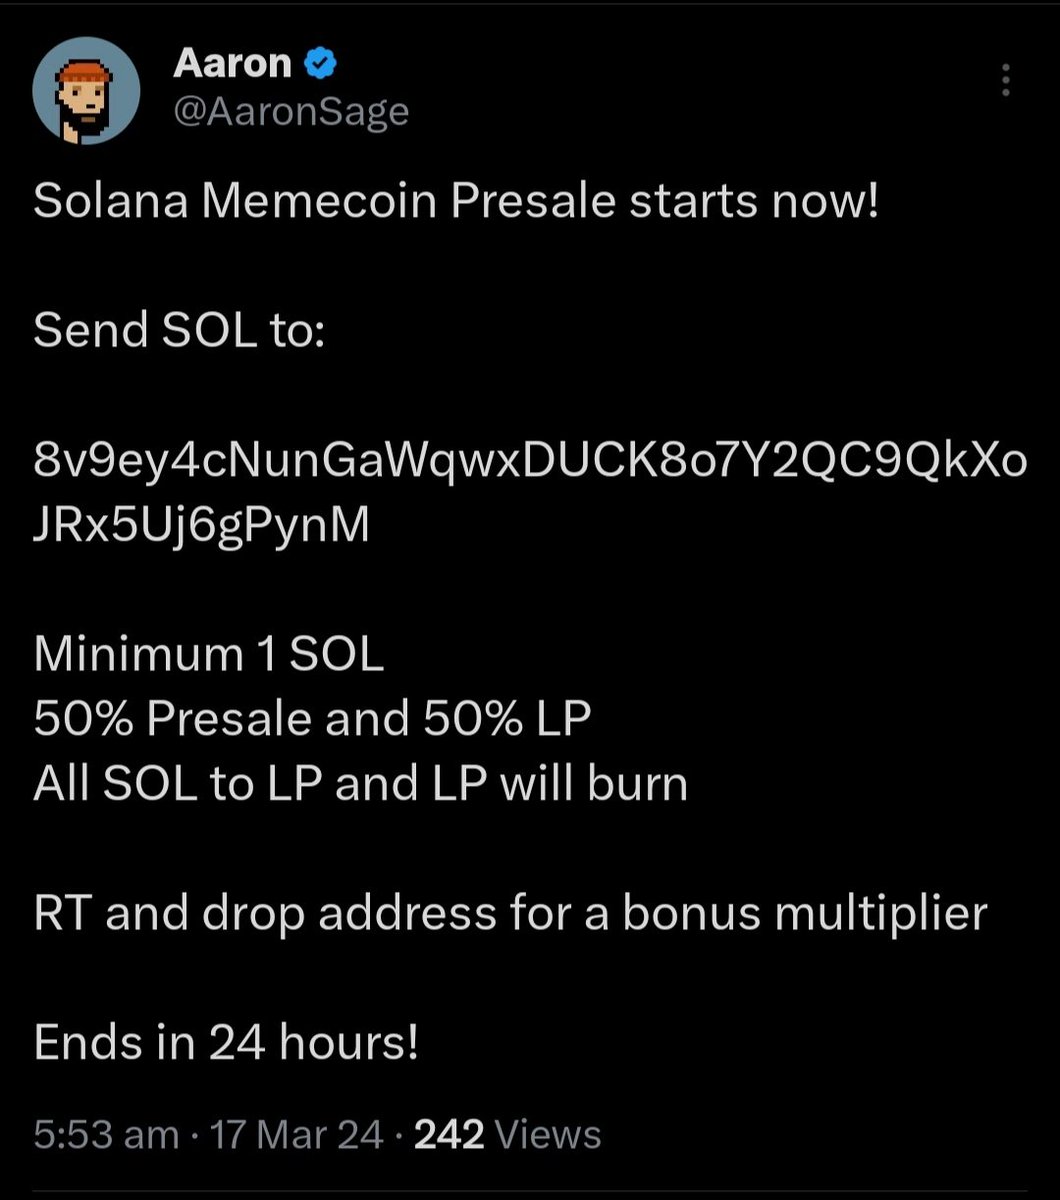 Influencer turned scammer @AaronSage reactivated his account few minutes ago just to join the meme coin mania on $SOL

⚠️ Do not join this Presale!
This guy is a scammer

With the rise of #NFTs on $SEI, Aaron became an influential figure. After a while, he launched his project